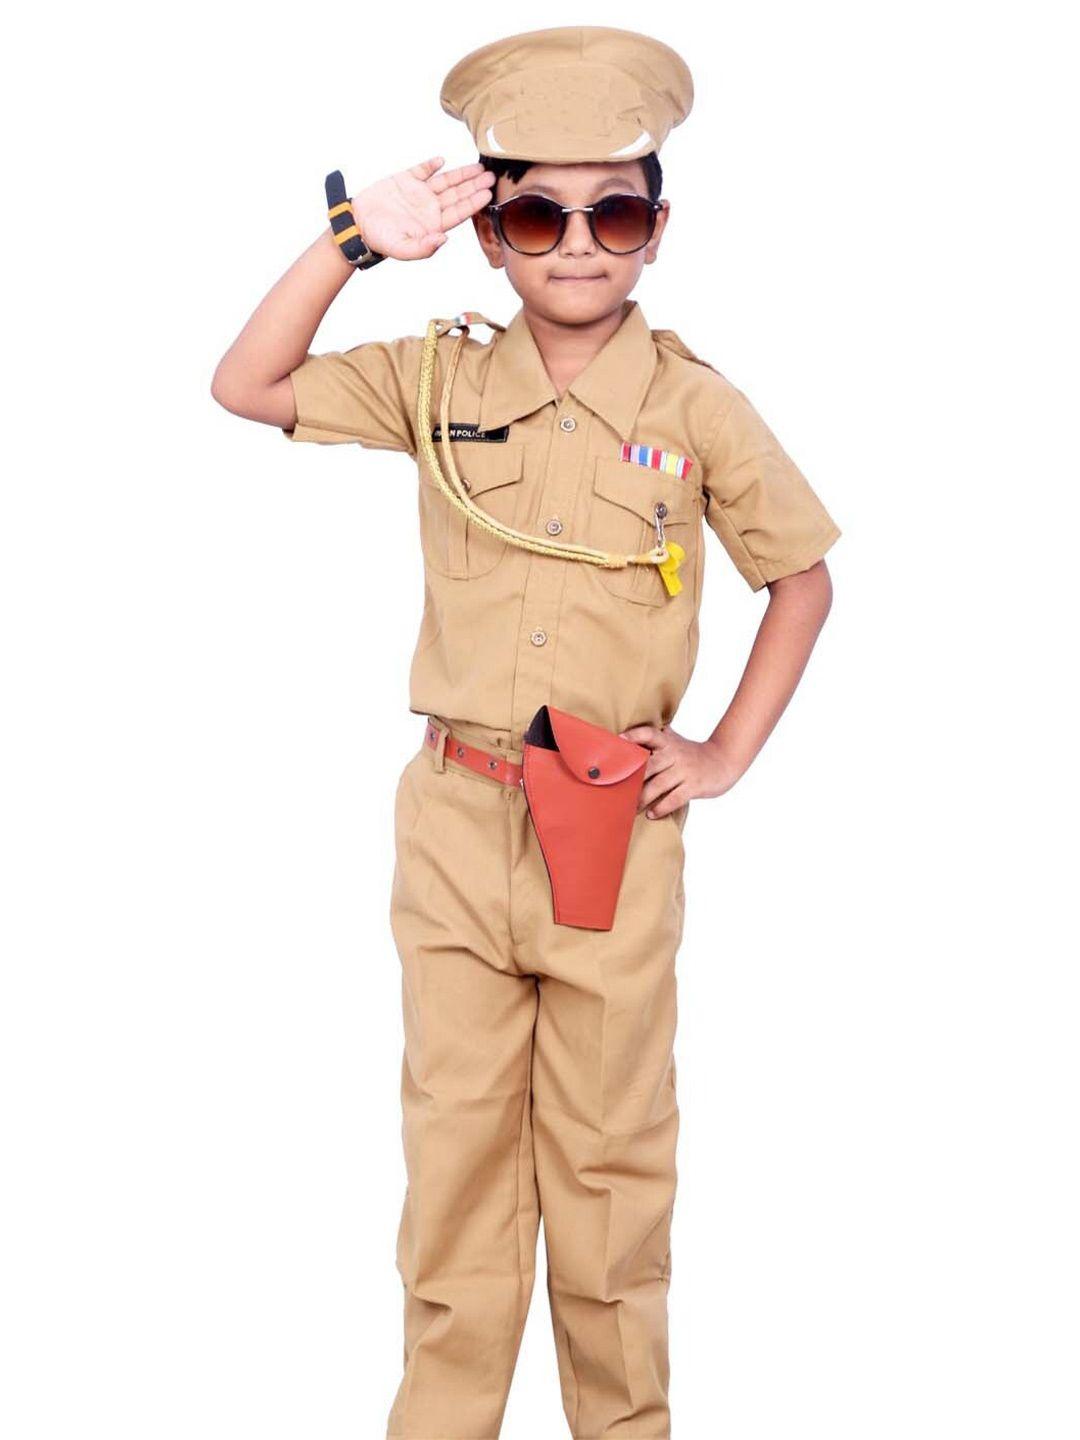 BAESD Kids Shirt with Trousers Police Costume Clothing Set